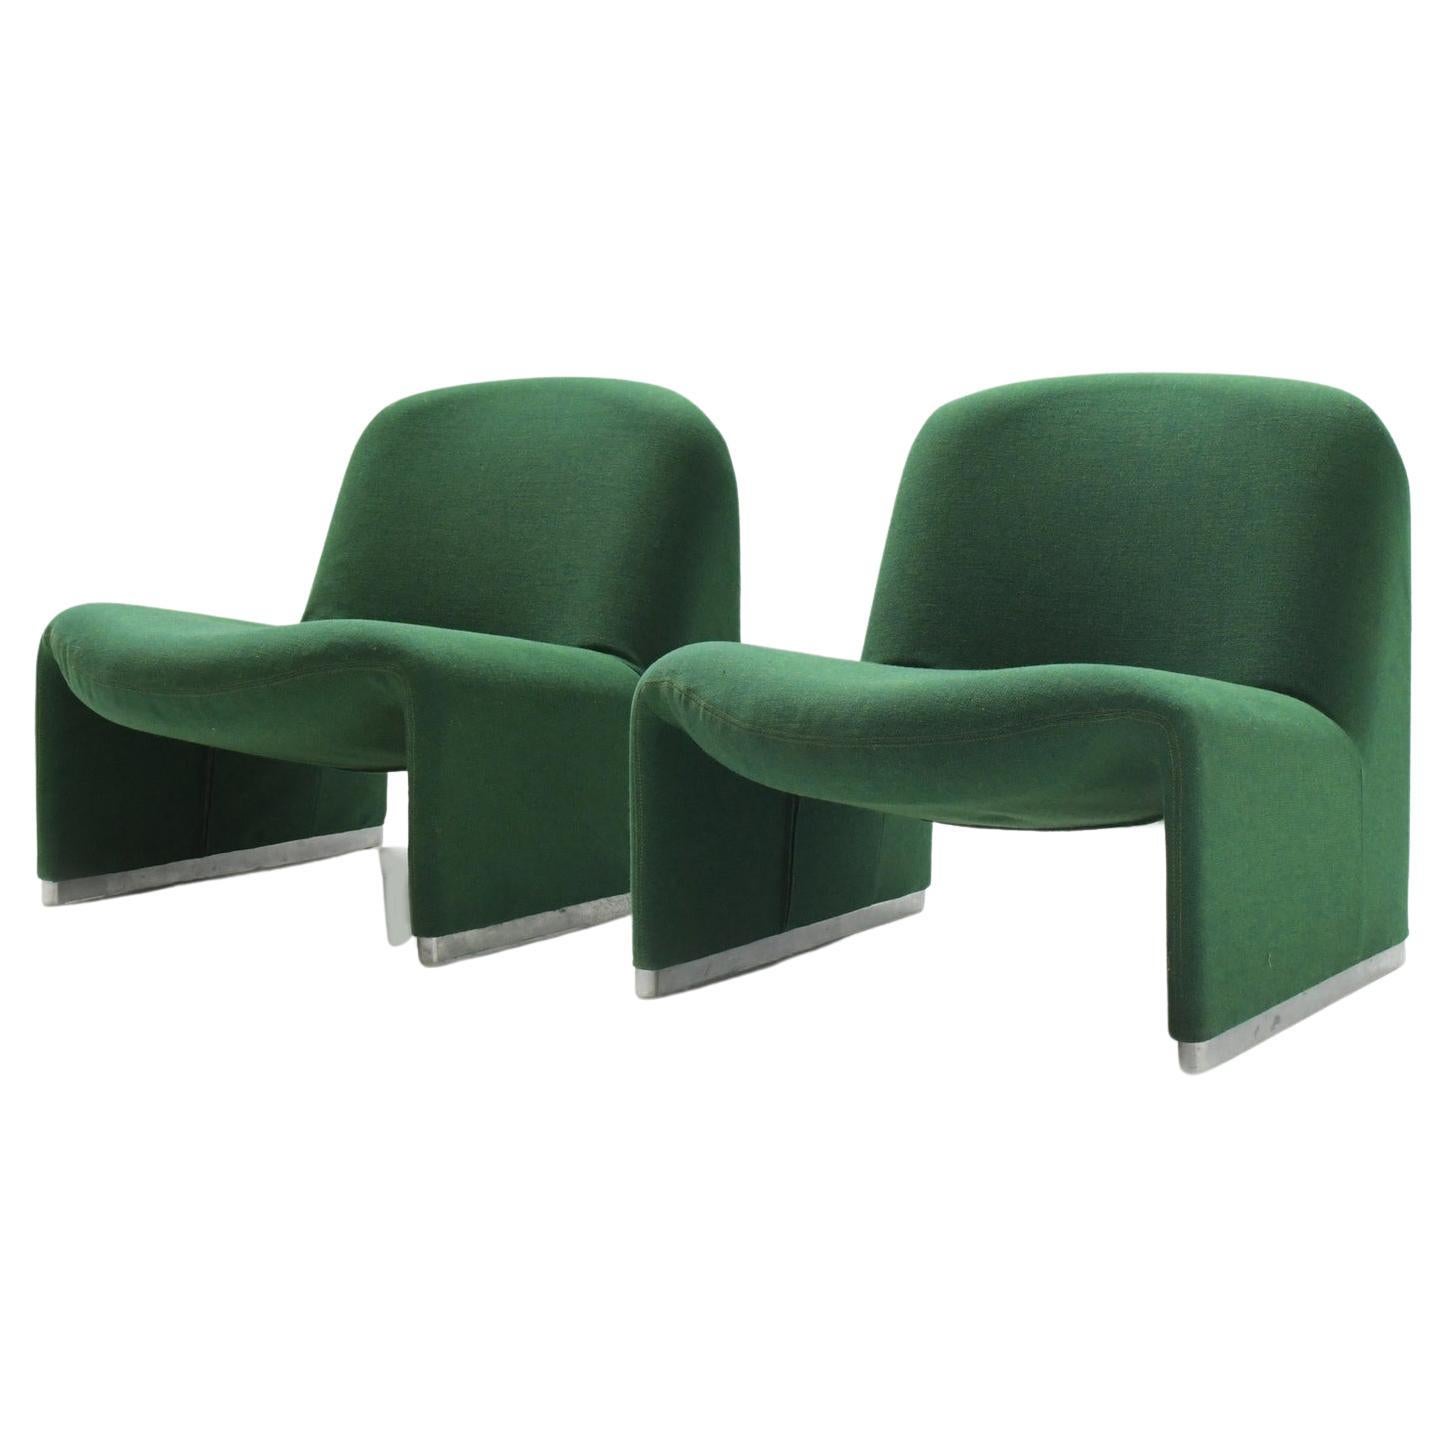 Vintage Alky chairs in original green fabric by Giancarlo Piretti for Castelli